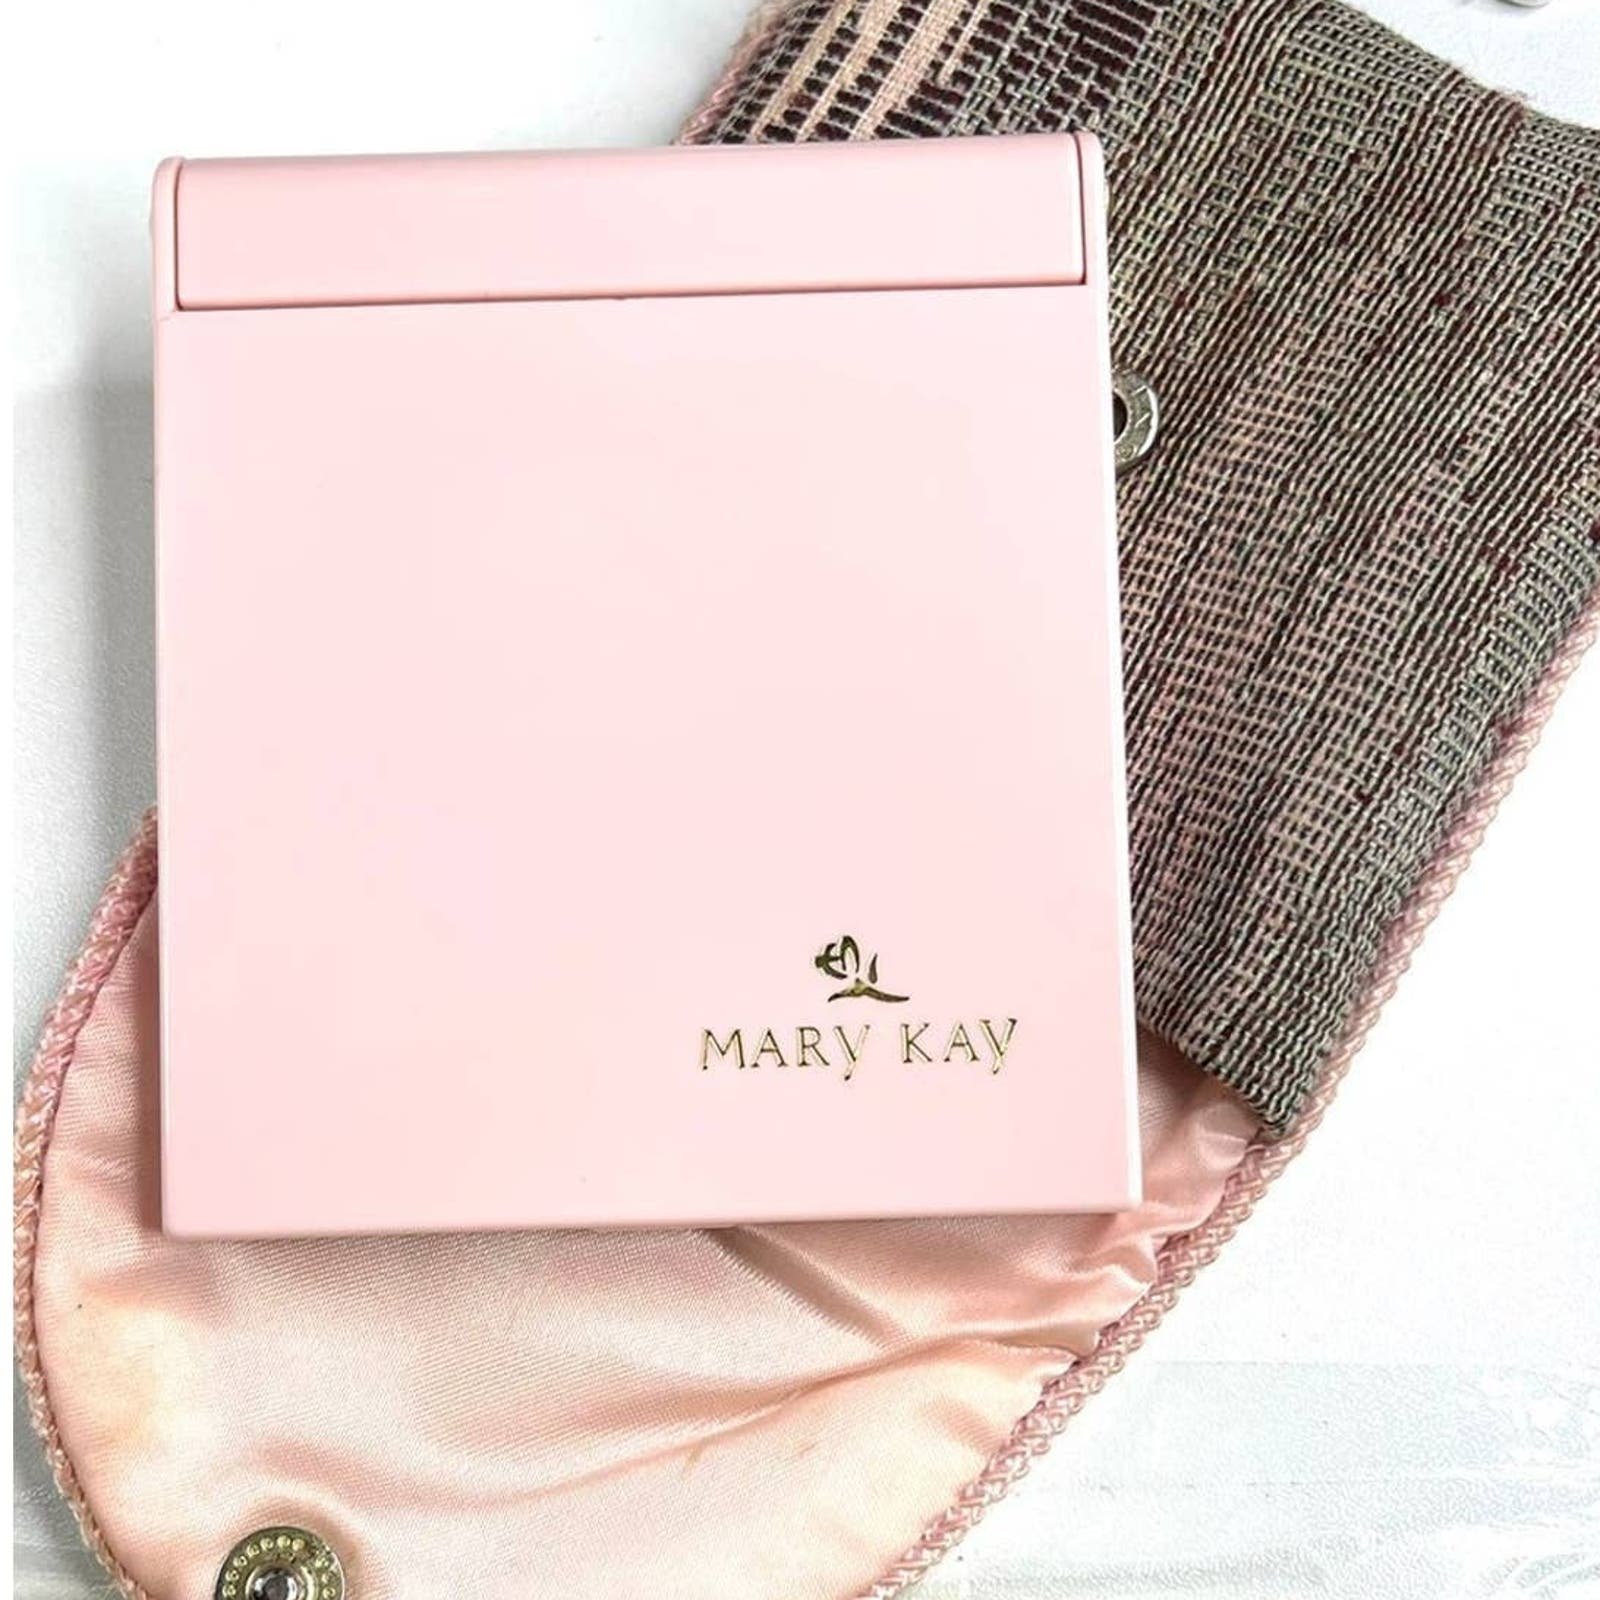 VINTAGE Commercial Compact Mirror & Pouch by MARY KAY Pink F29 0pqPLkBxH